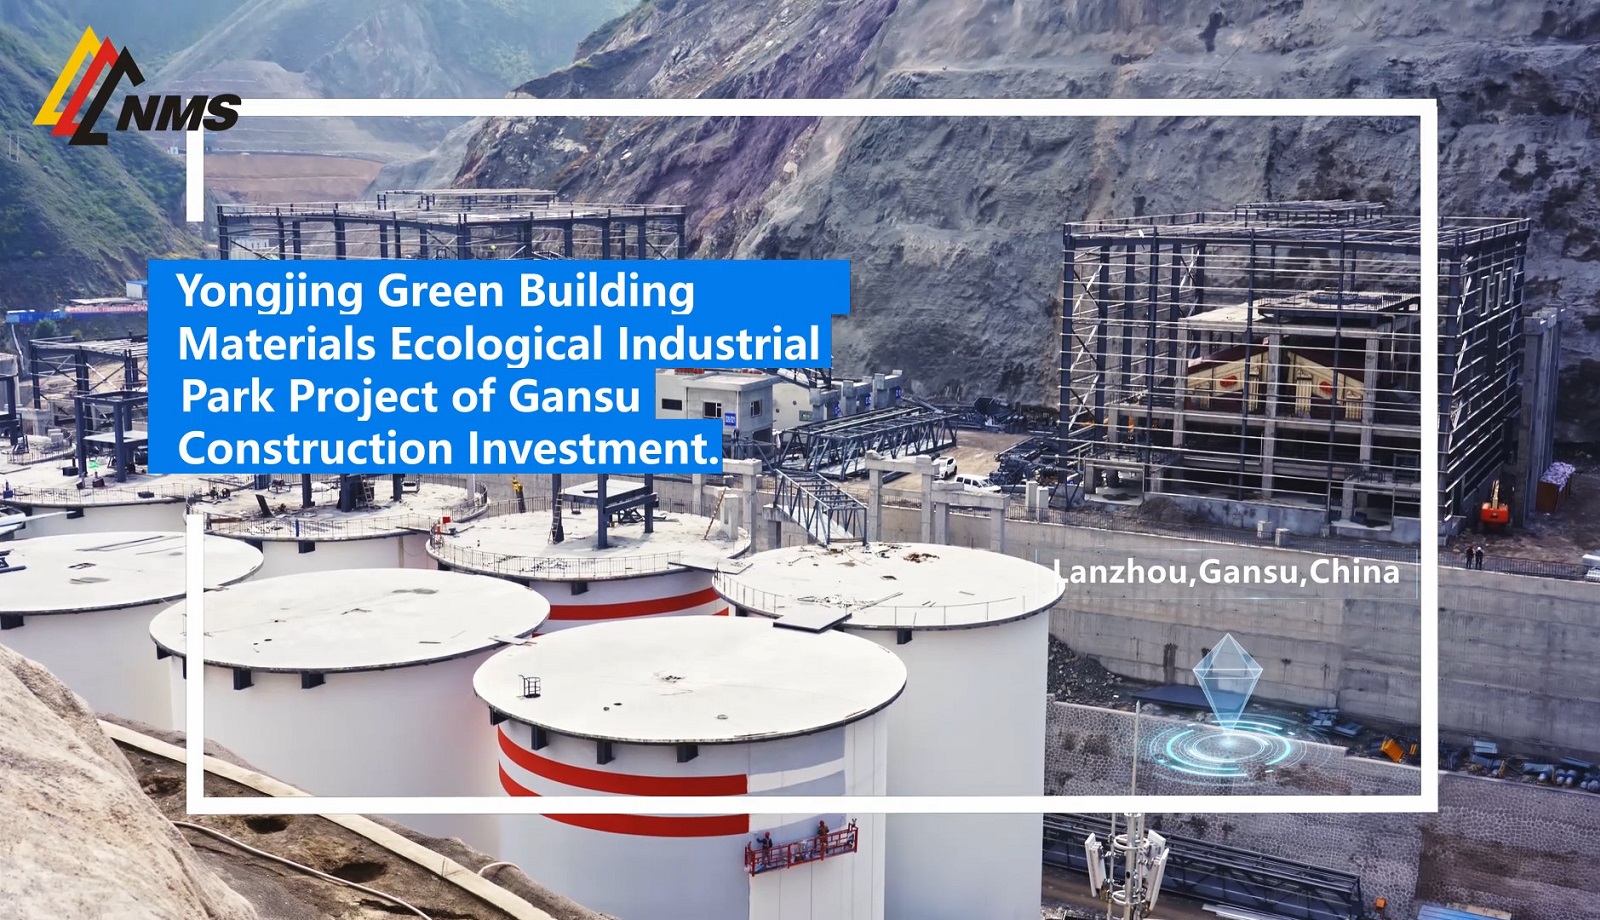 Yongjing Green Building Materials Ecological Industrial Park Project